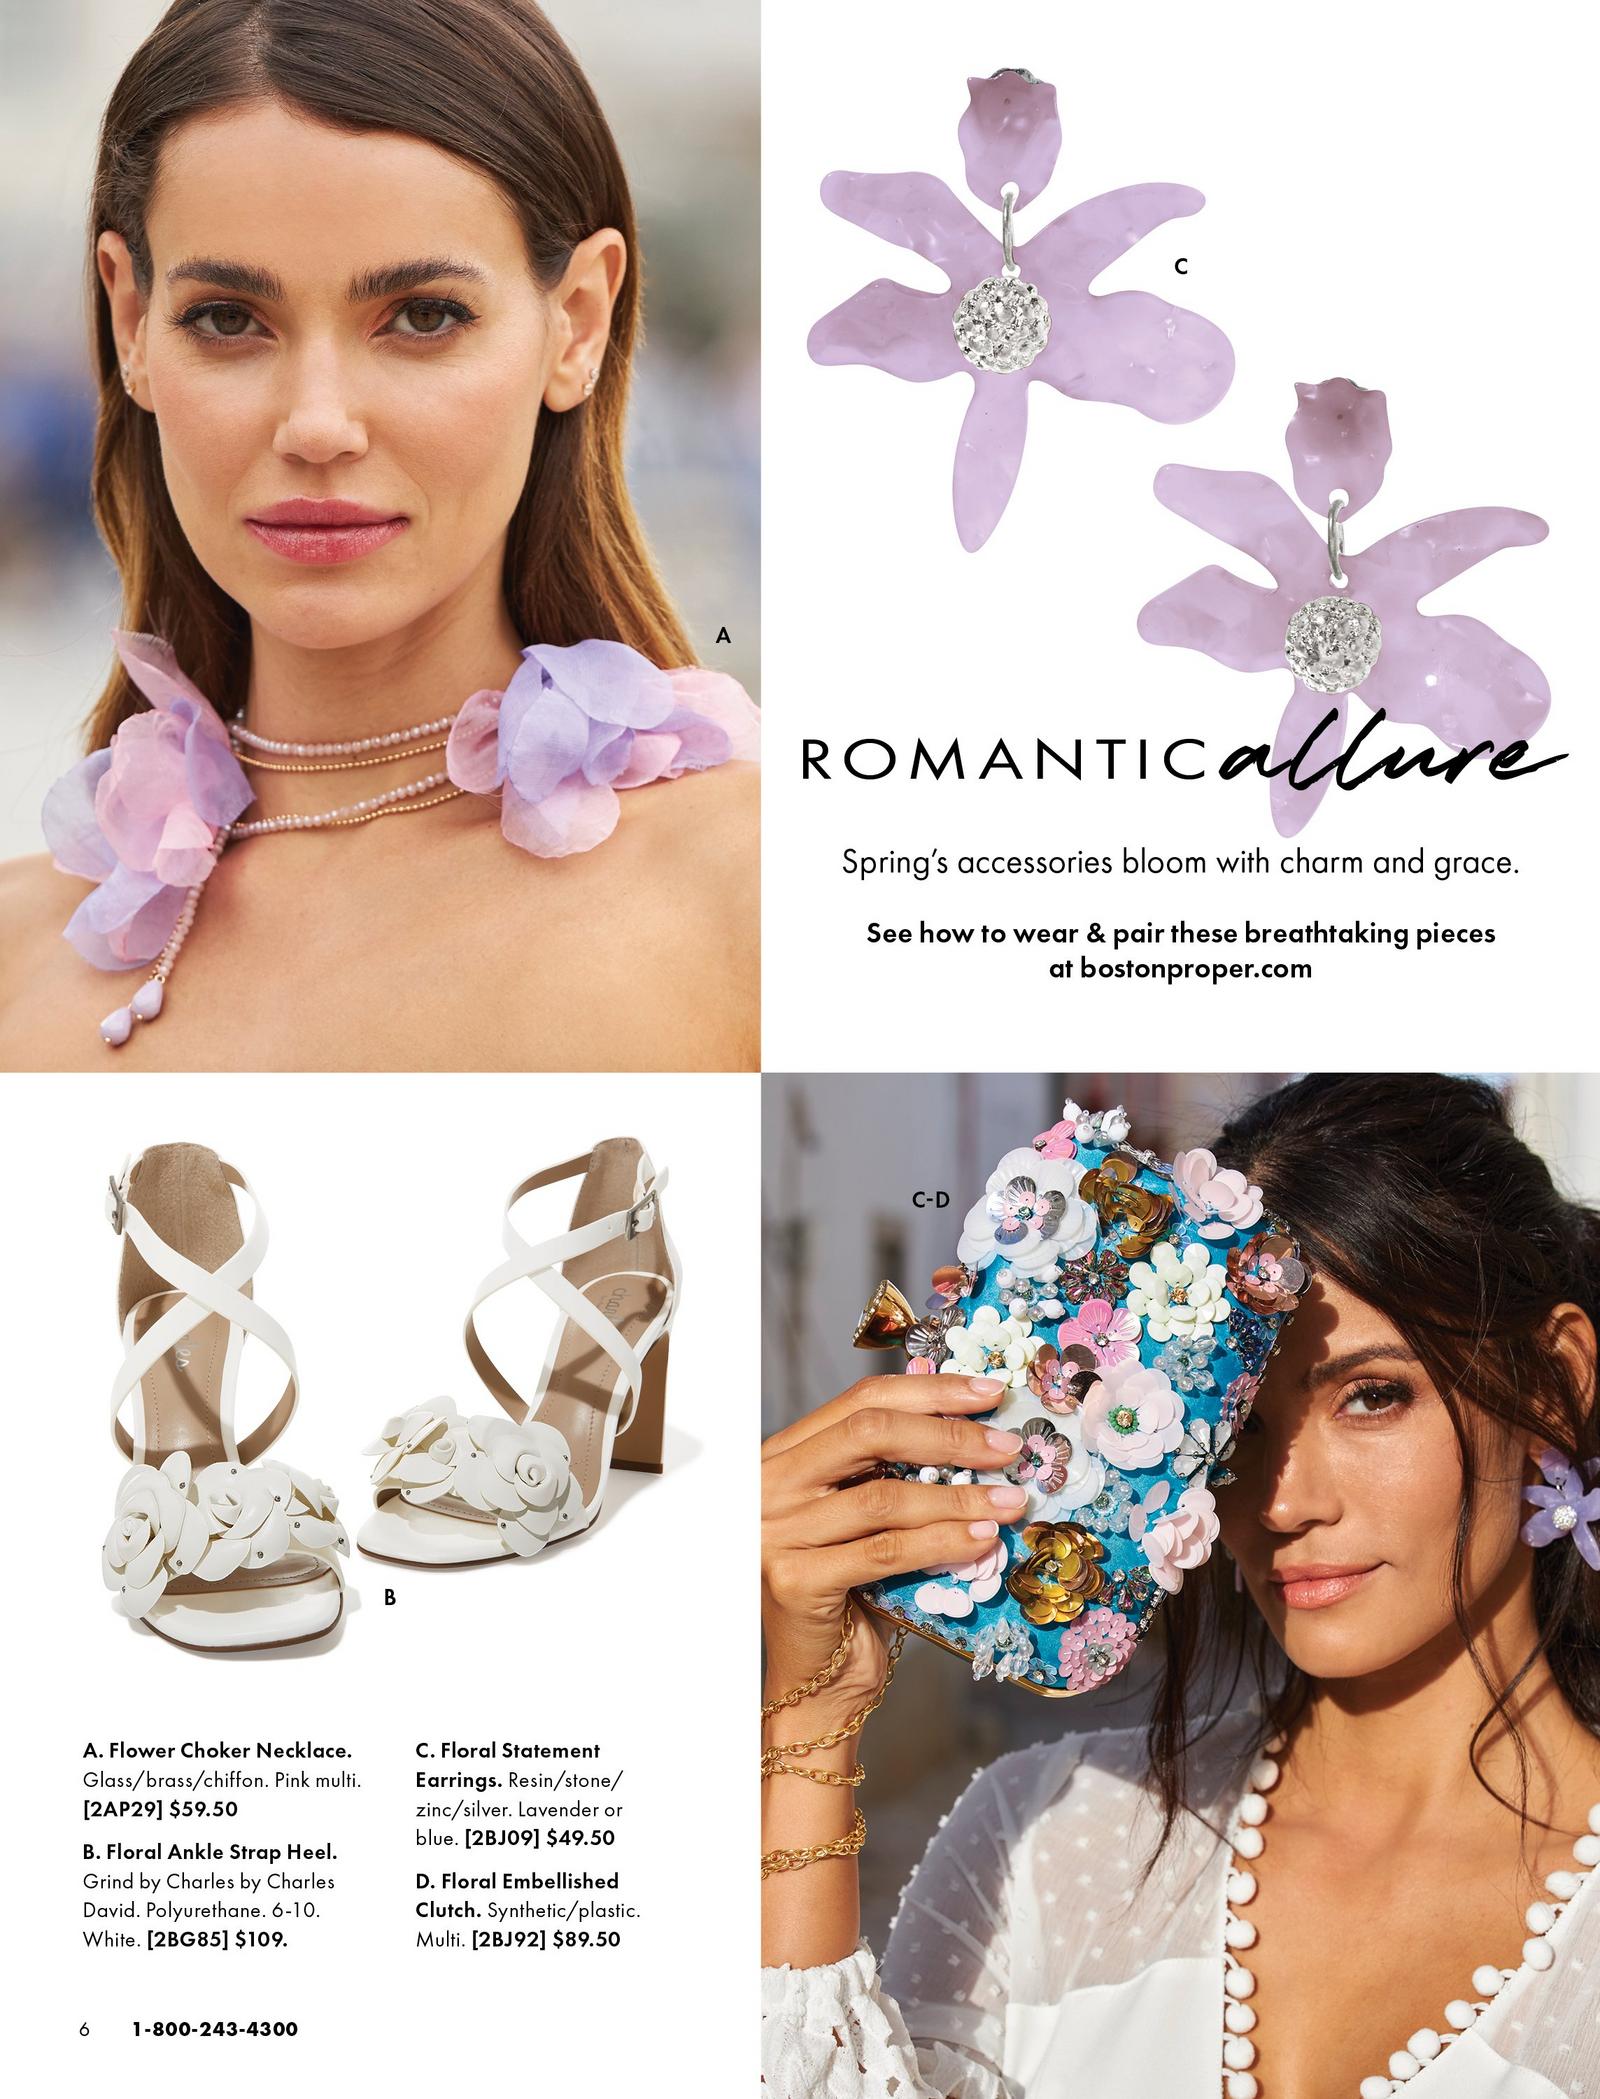 top left model wearing a pink and purple flower choker necklace. top right panel shows a purple pair of floral earrings. bottom left panel shows white floral ankle strap heels. right model holding a floral embellished clutch and wearing purple floral earrings and a white lace dress.